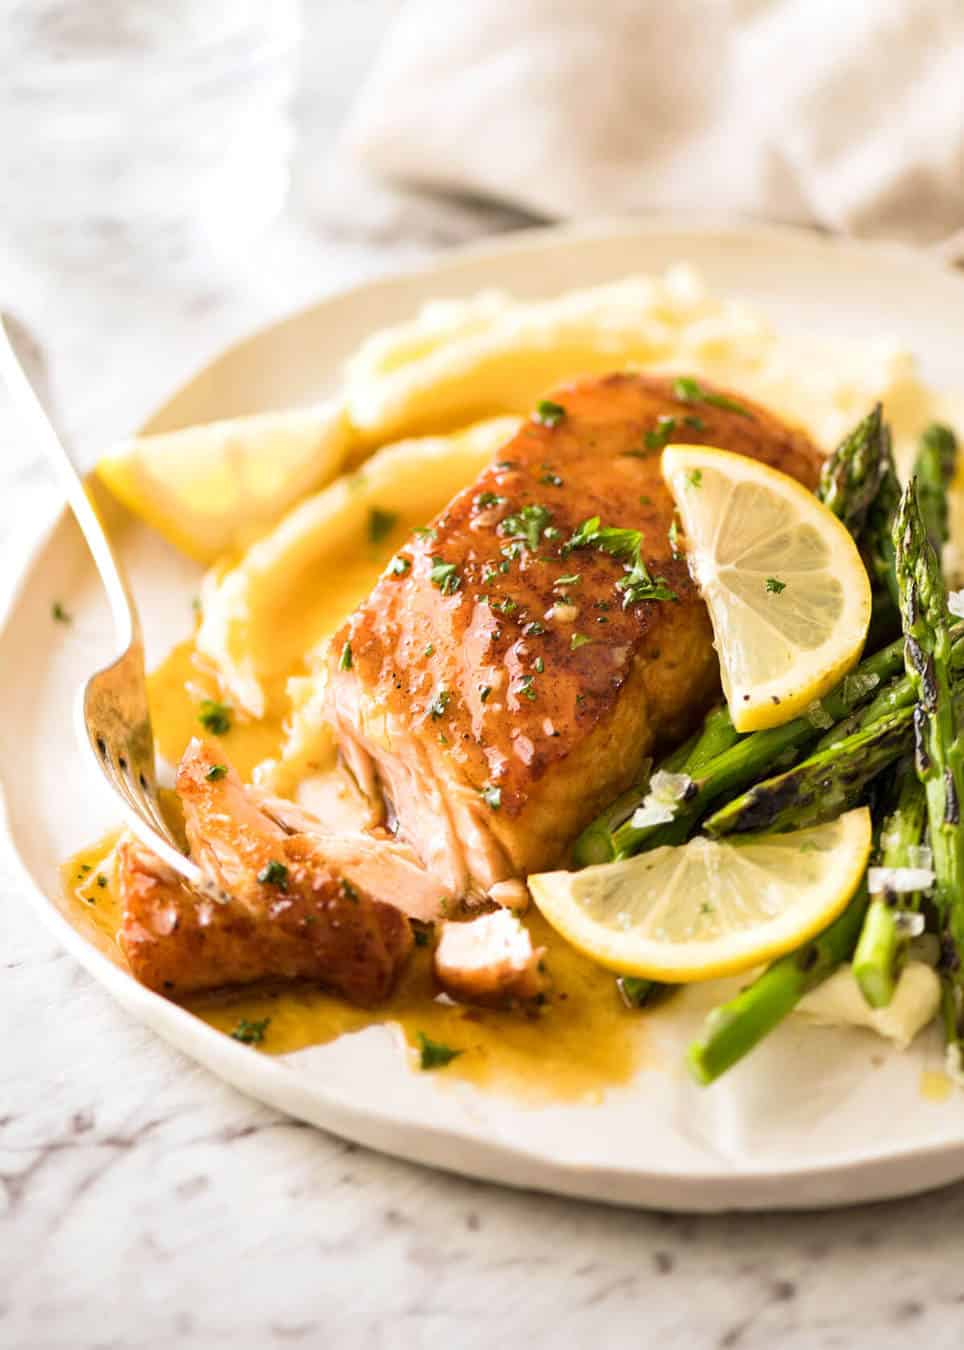 If this Lemon Honey Glazed Salmon takes more than 8 minutes to make, you've overcooked the salmon. That sauce is lip smackingly delicious! www.recipetineats.com